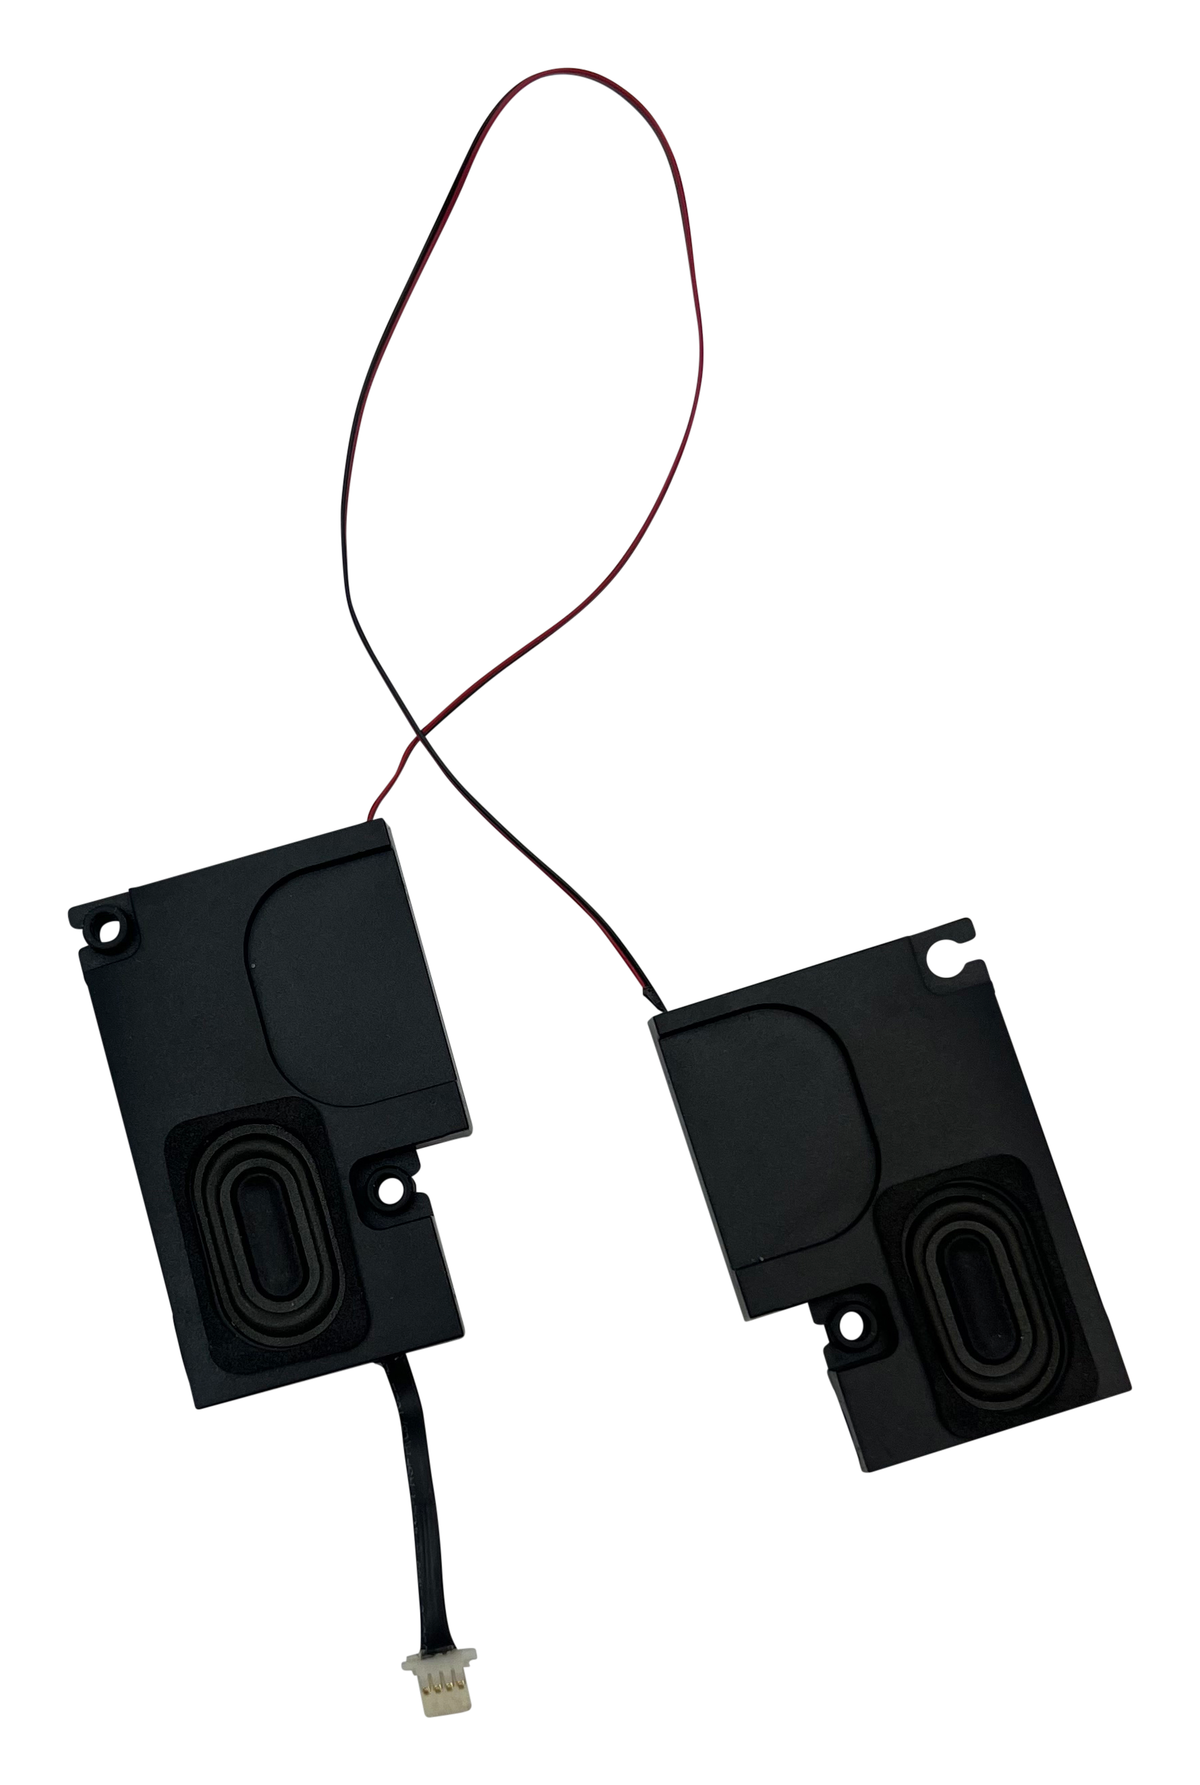 CTL NL7, and NL71 Series Speakers